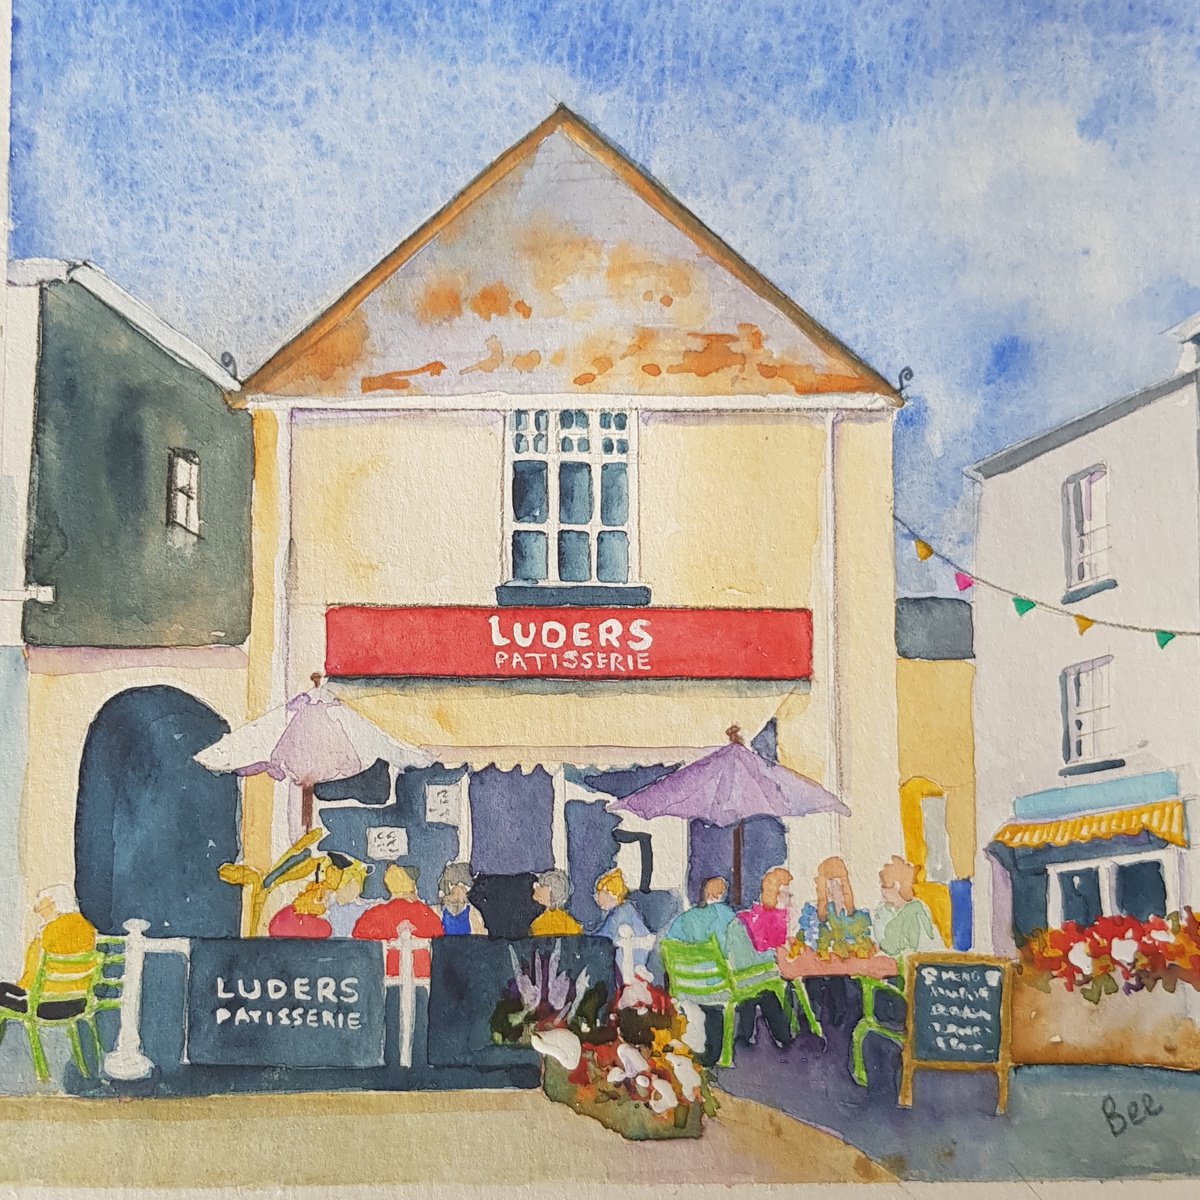 Luders Patisserie, Teignmouth, Devon by Bee Inch